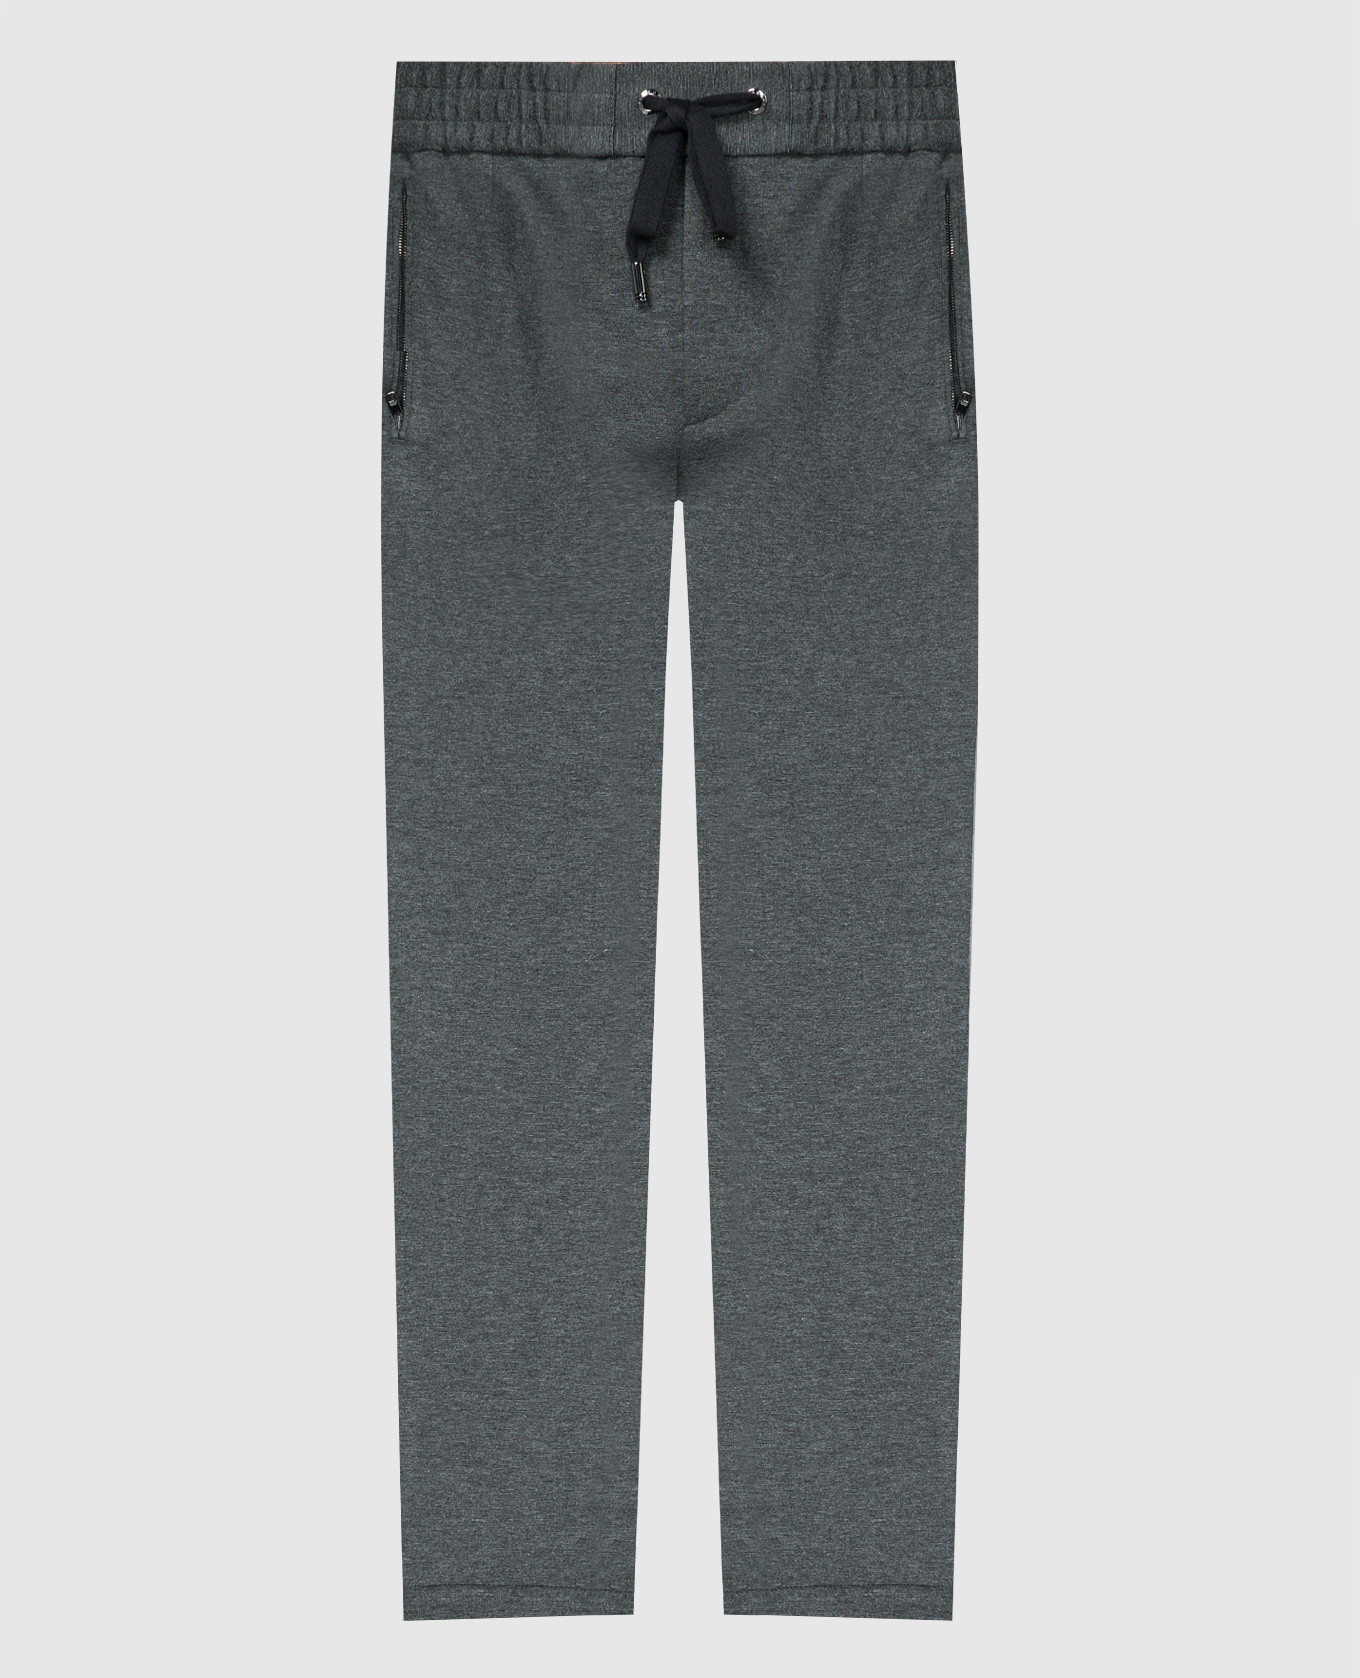 Gray sweatpants with logo embroidery